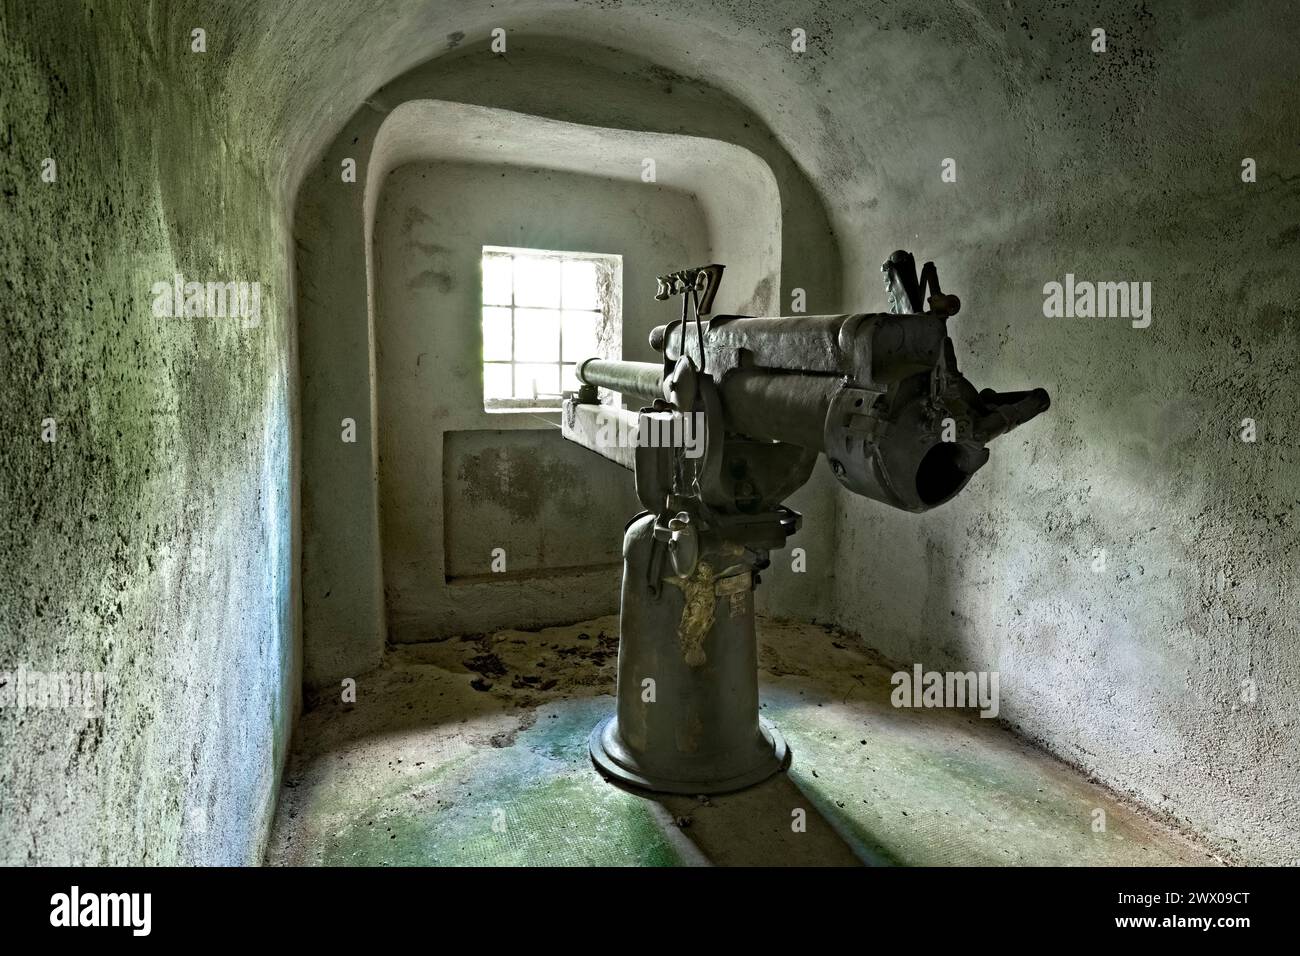 Fort Coldarco: 75A cannon on mount inside a casemate. Enego, Veneto, Italy. Stock Photo